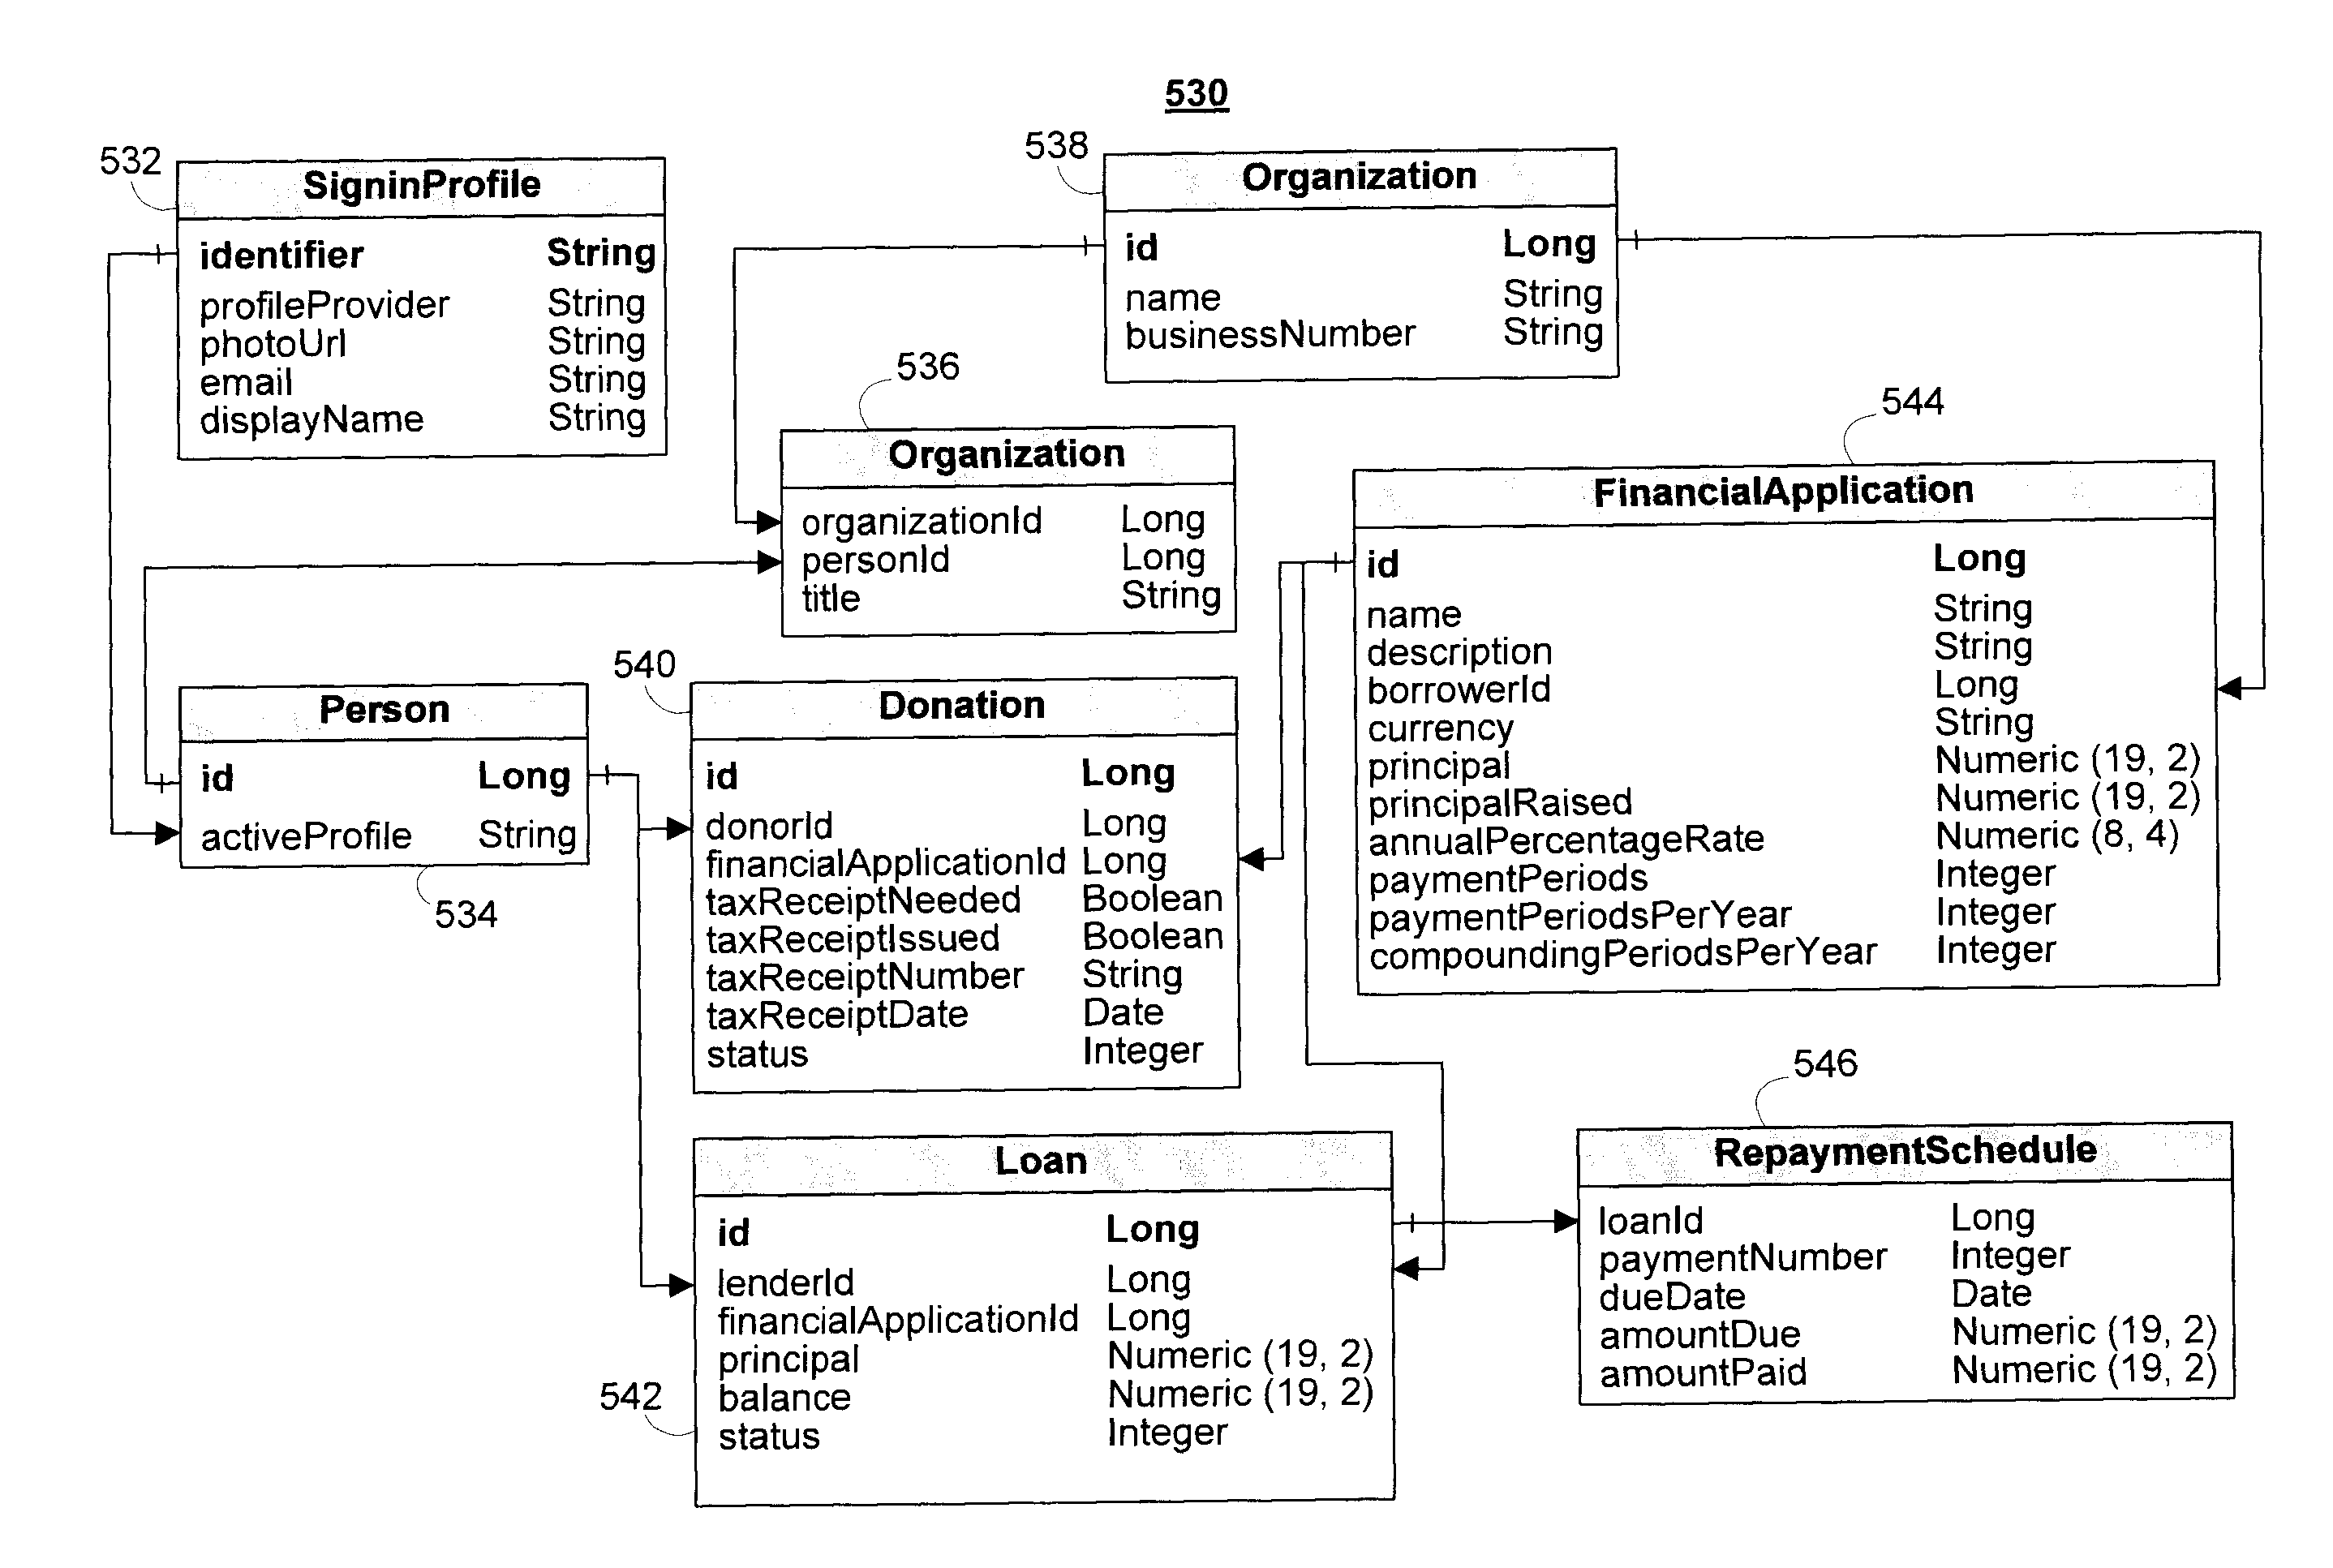 Systems and methods for providing virtual currencies